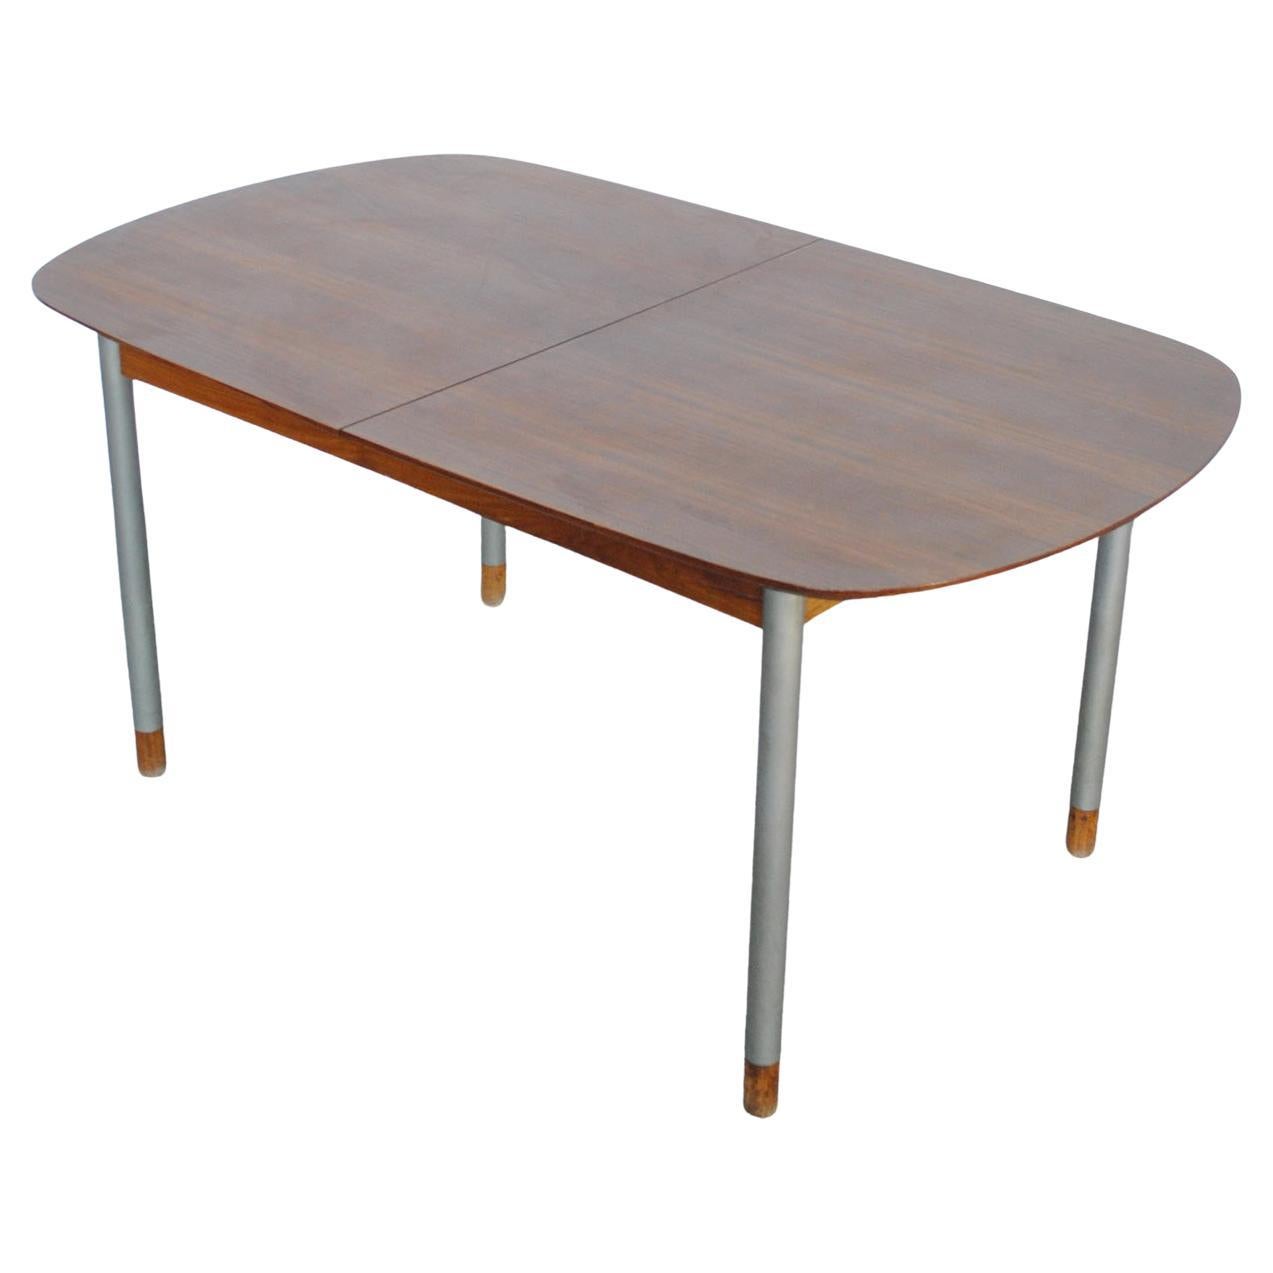 George Coslin Openable Wooden Table, Mid-Sixties For Sale